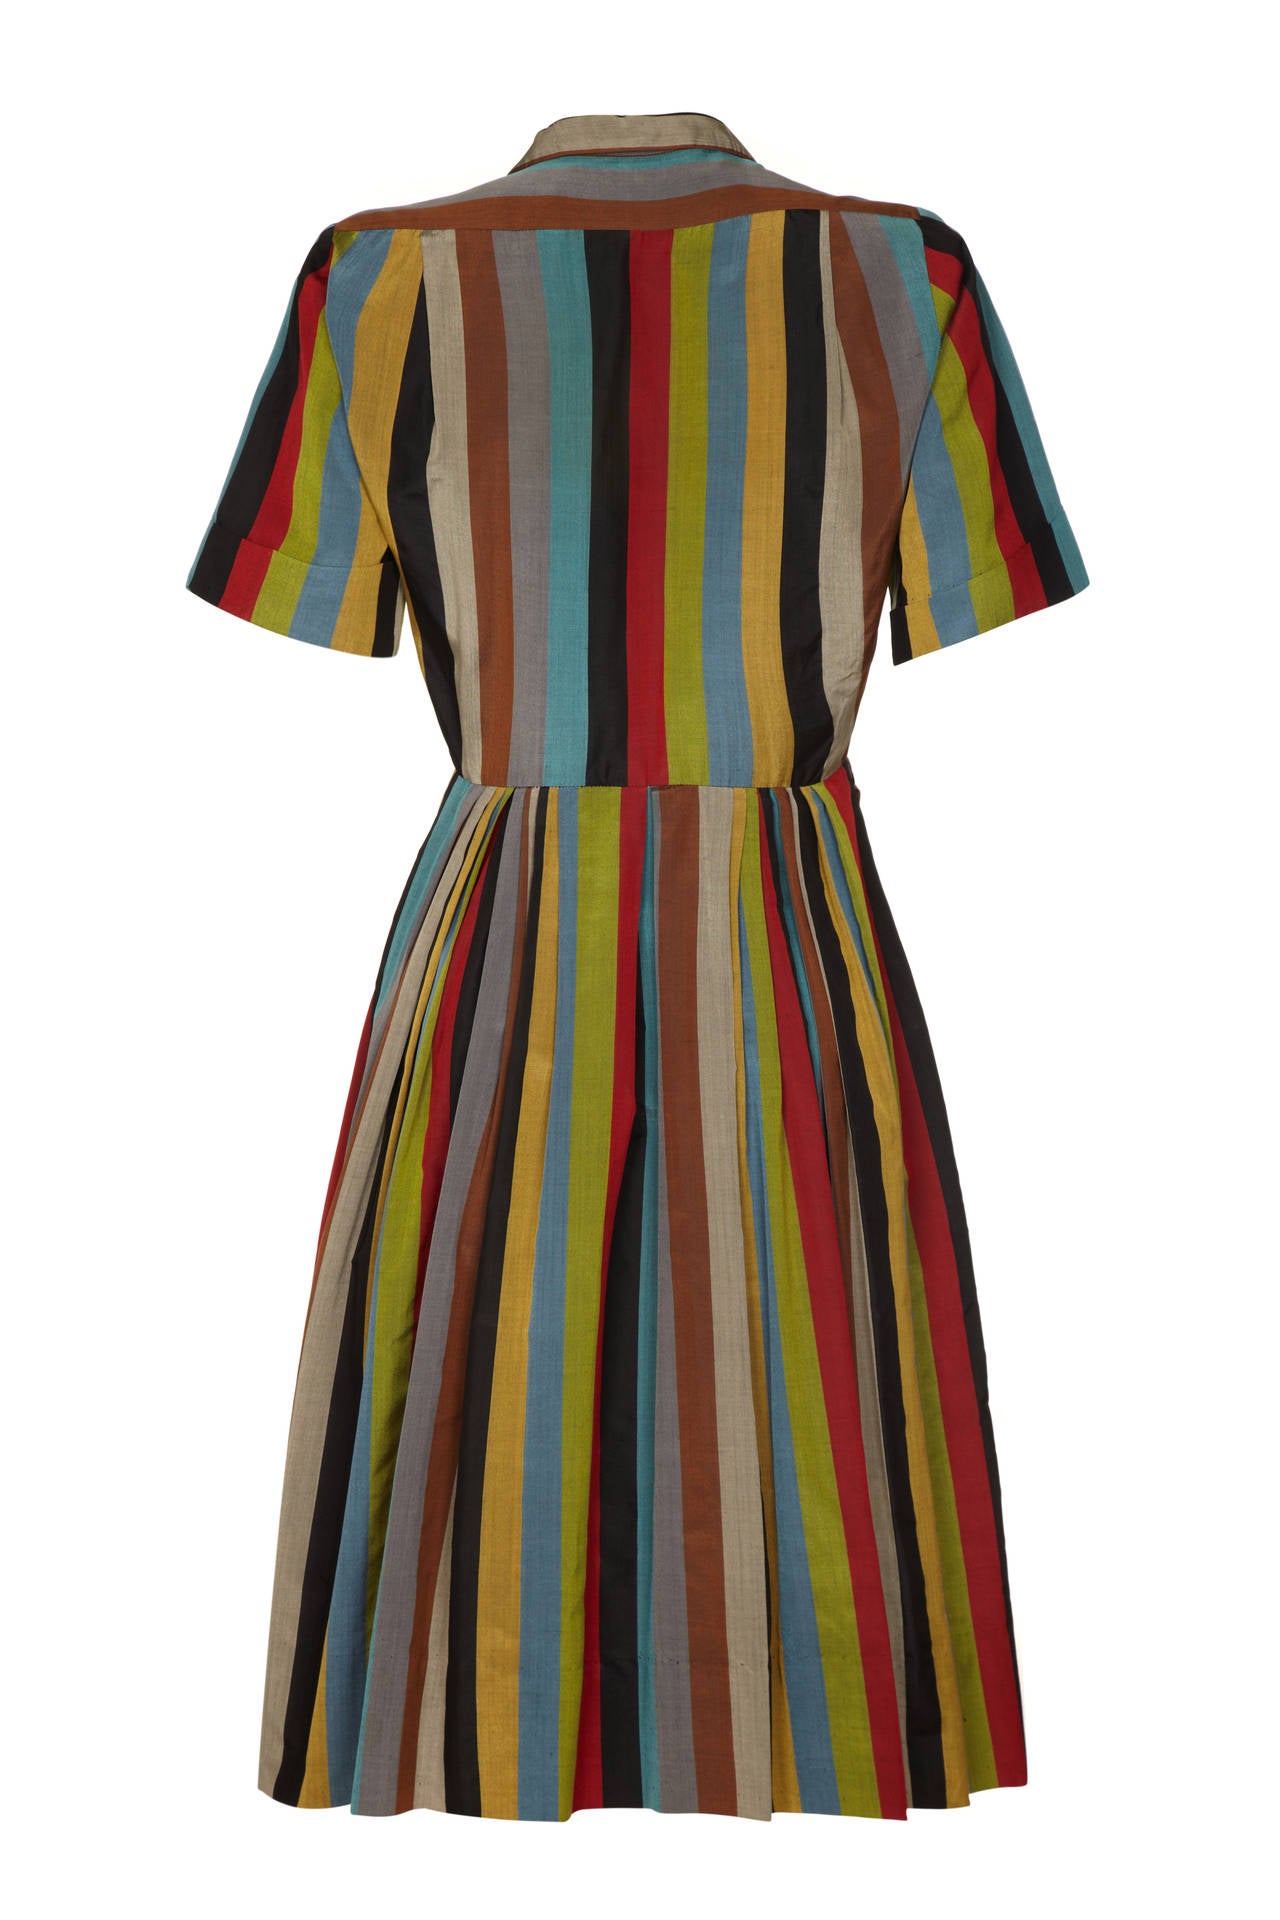 Very unusual vertically striped 1950s shirt dress from New York based retailer Peck & Peck. This lovely multi-coloured lightweight silk piece is typical of the style of the day with full, below the knee skirt, button fastening down the front and